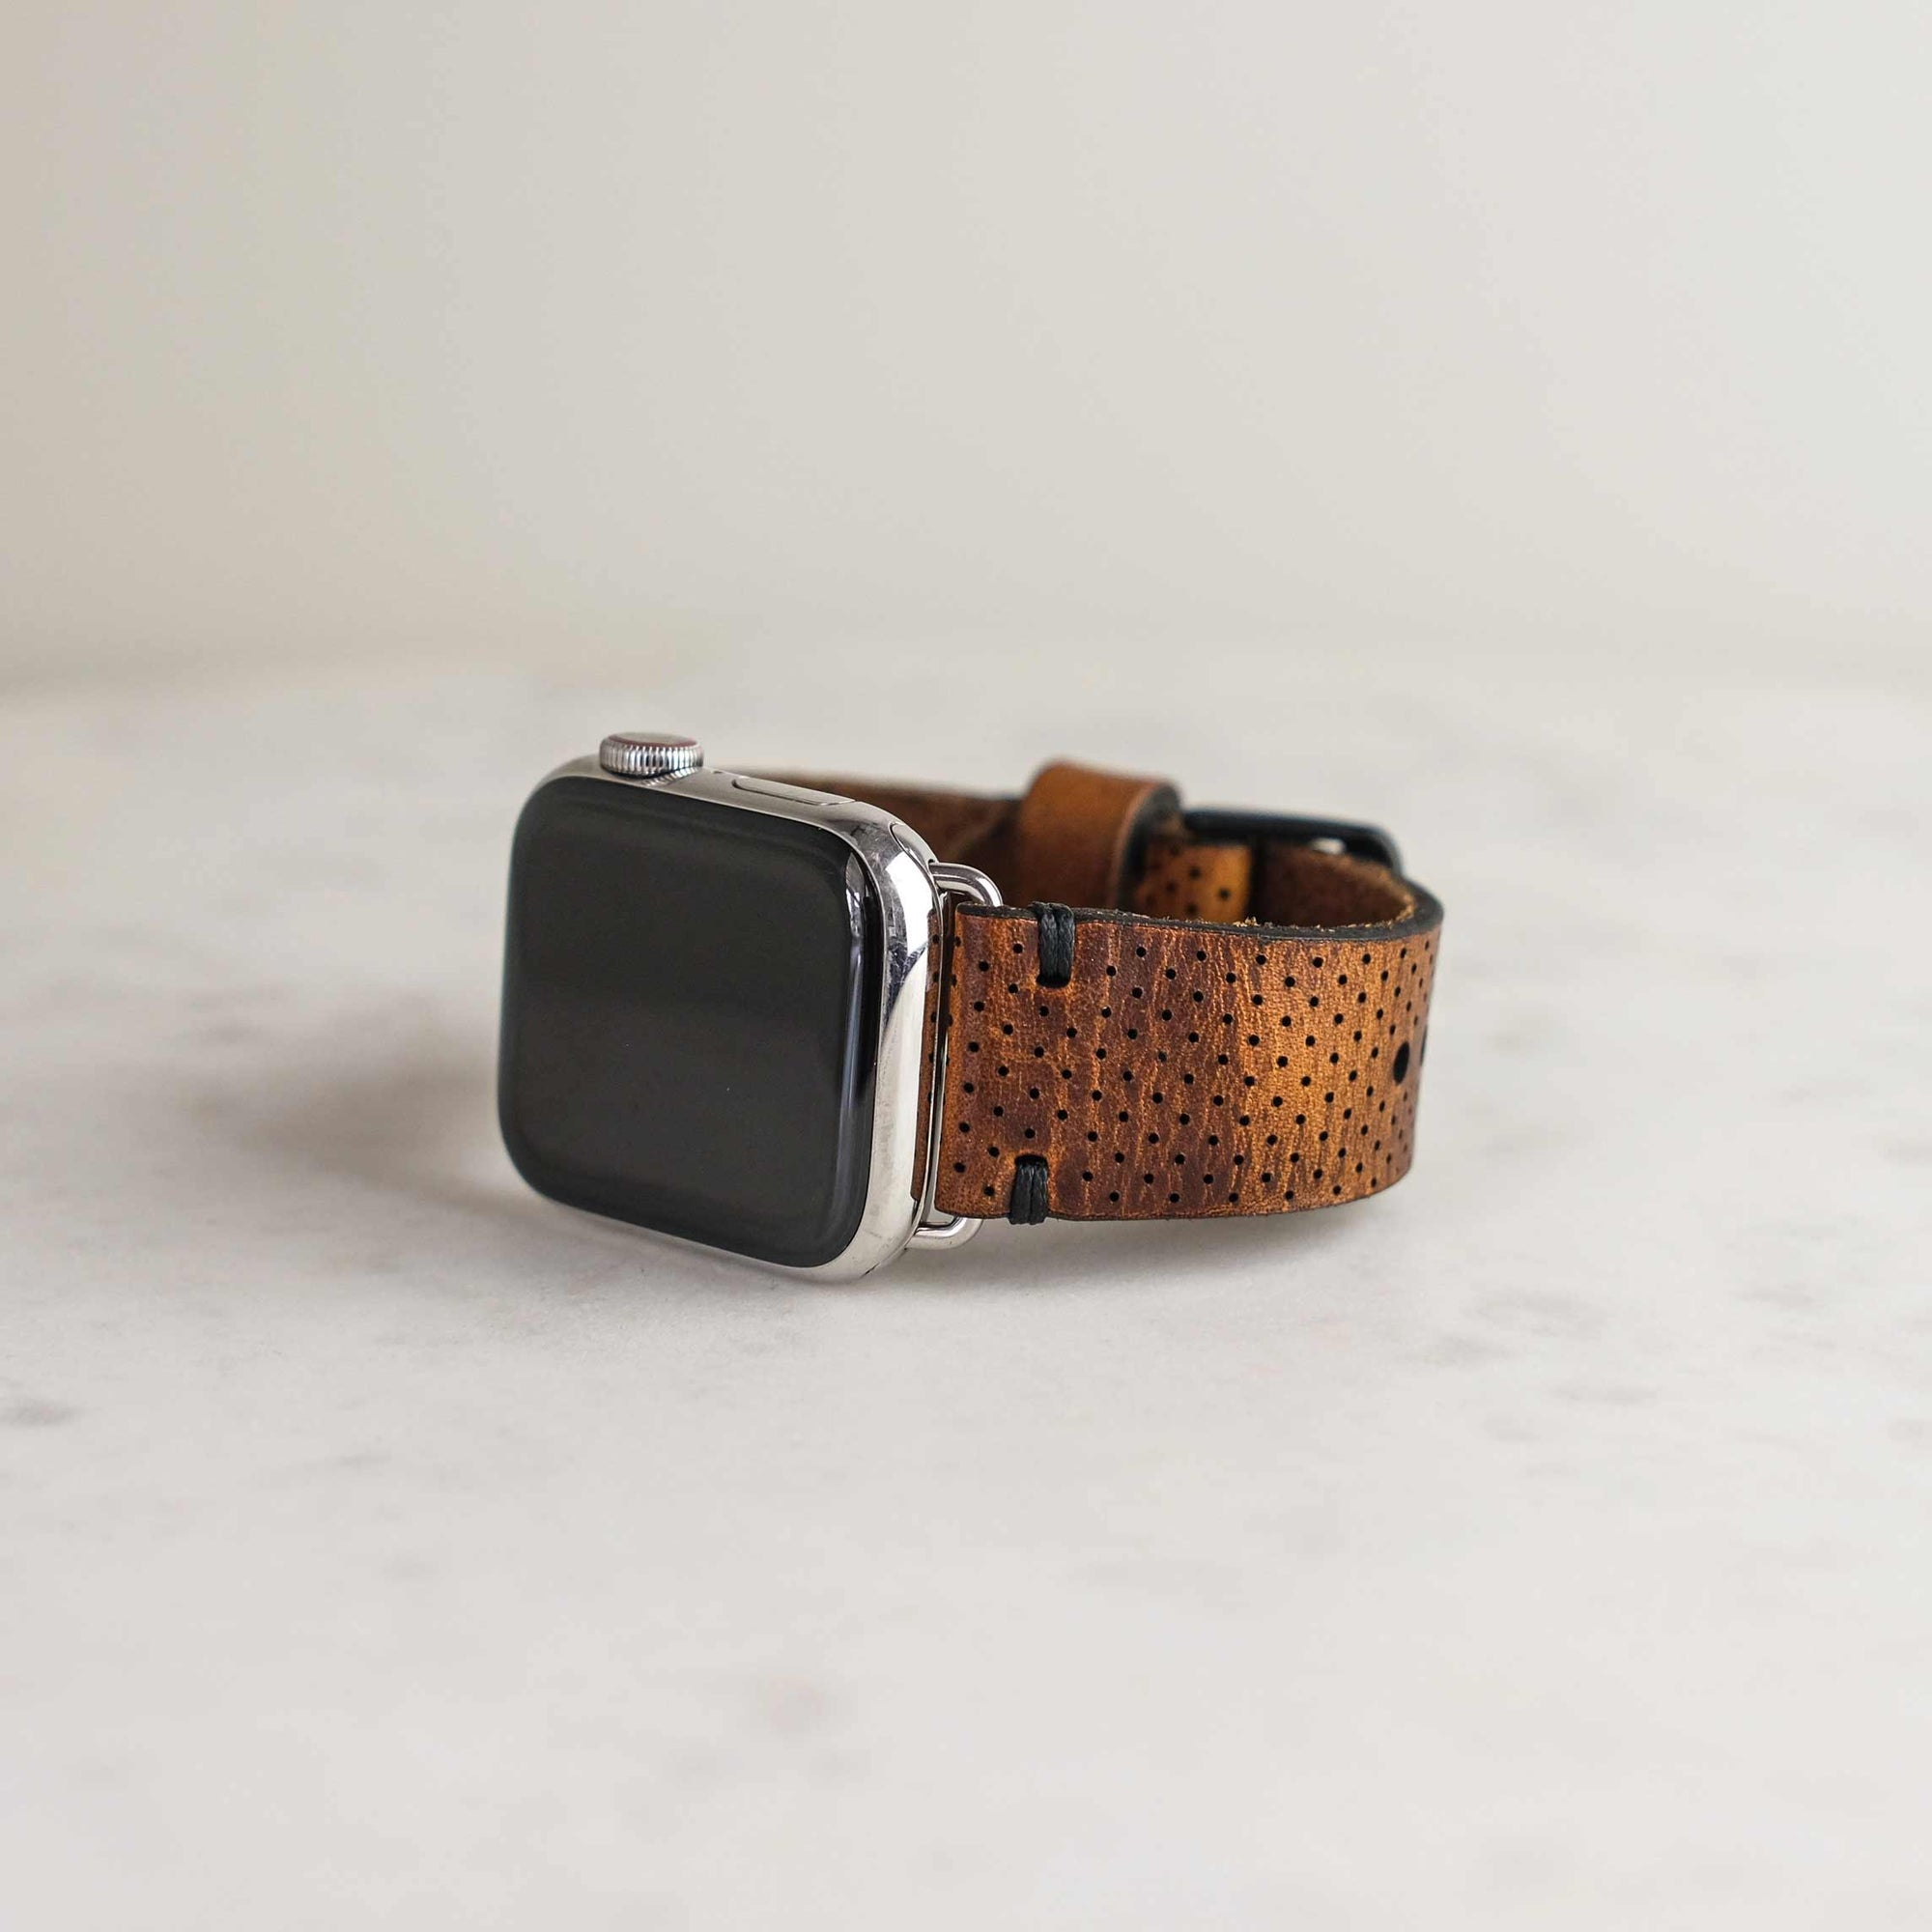 Apple Leather Watch Band | English Tan | Perforated Design